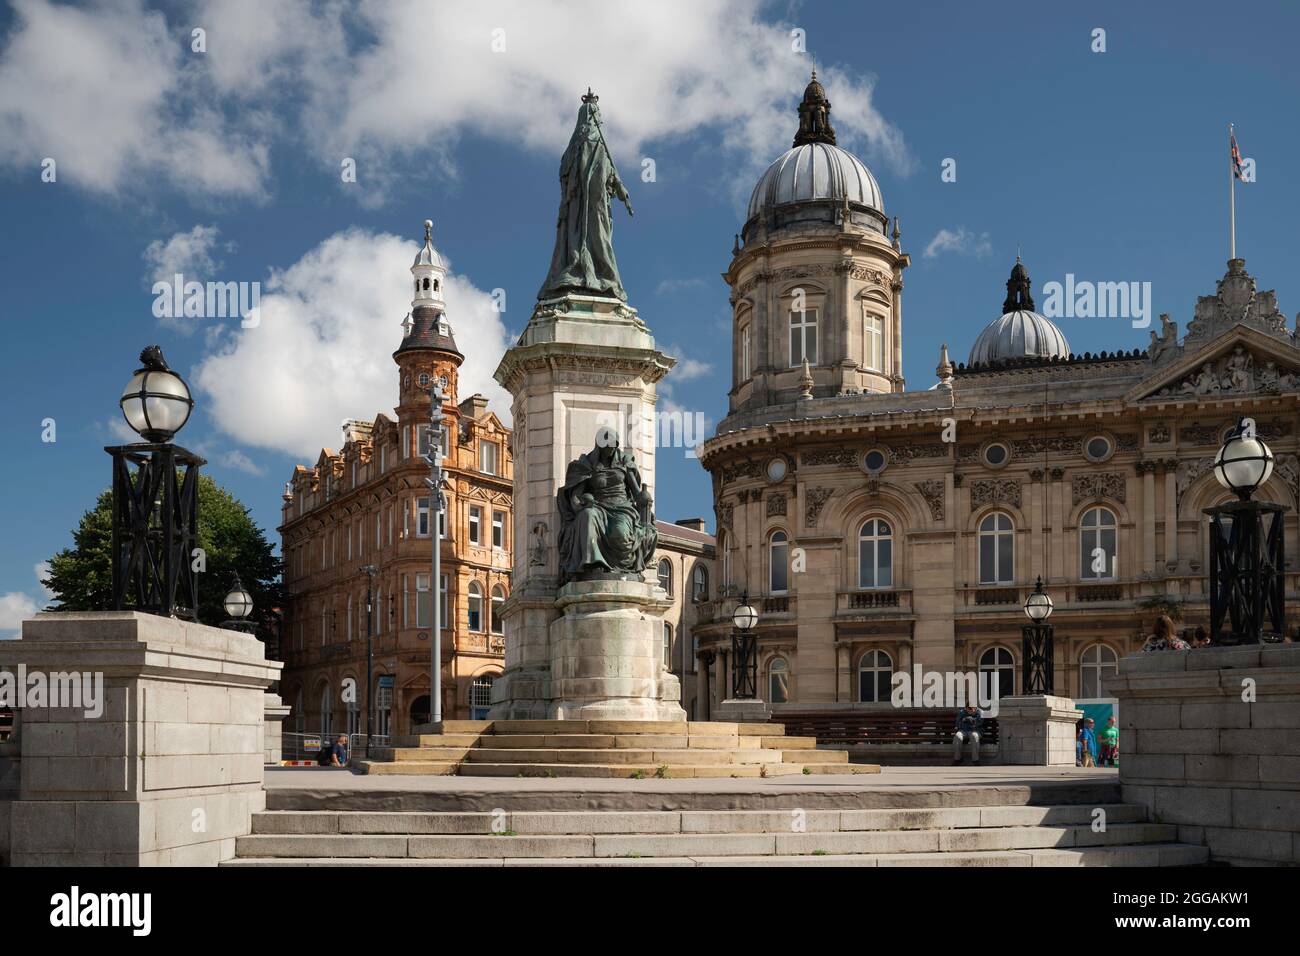 Victoria Square with prominent landmarks such as statues, buildings  and tourist attractions in city centre in Hull, UK. Stock Photo